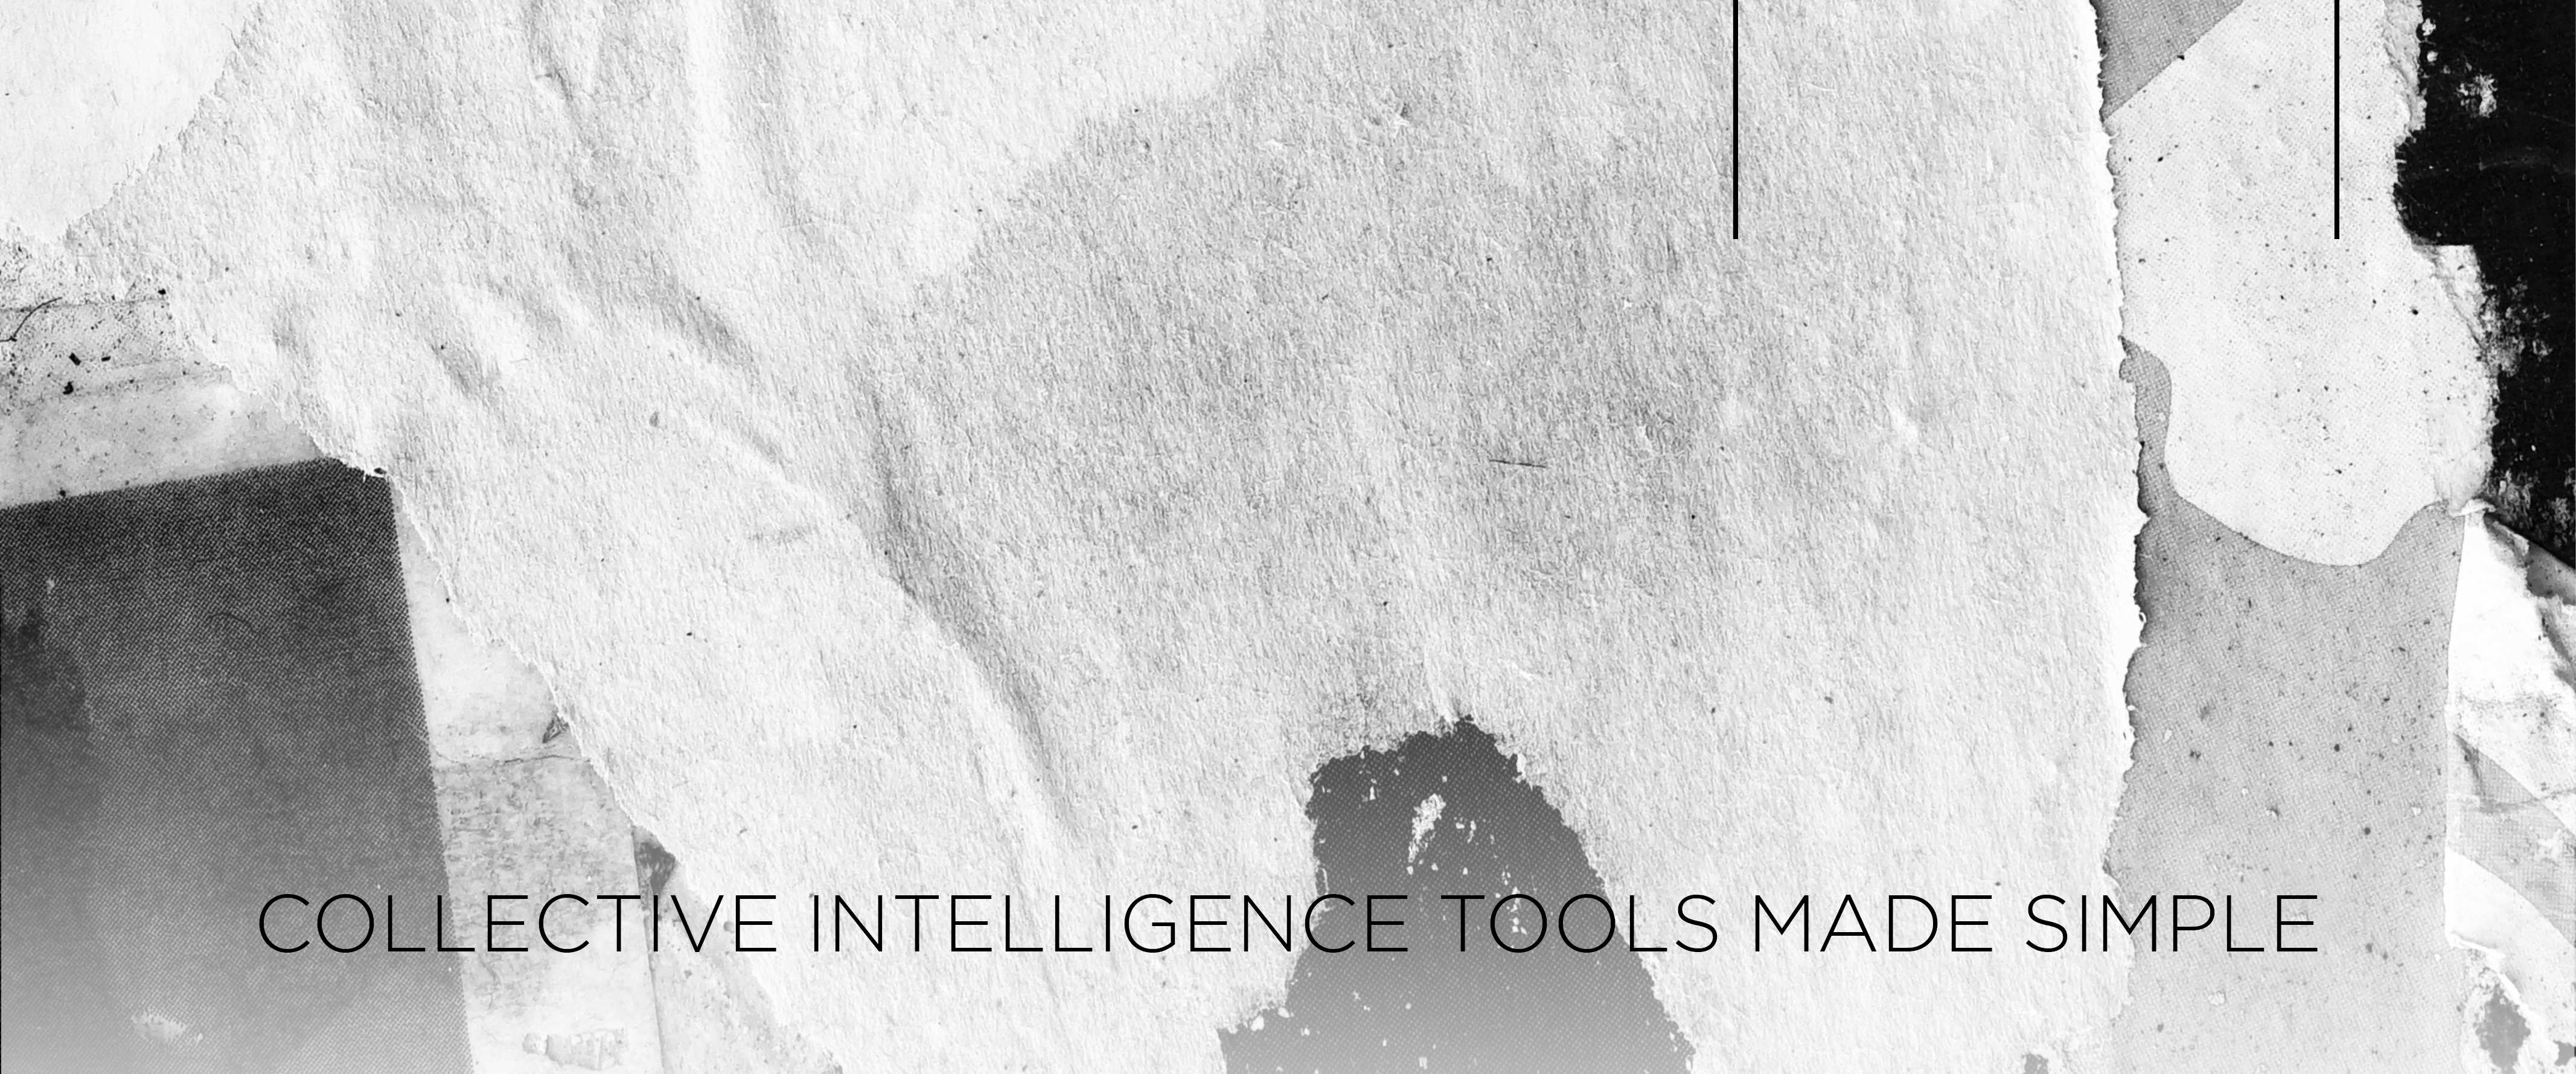 Collective intelligence tools made simple